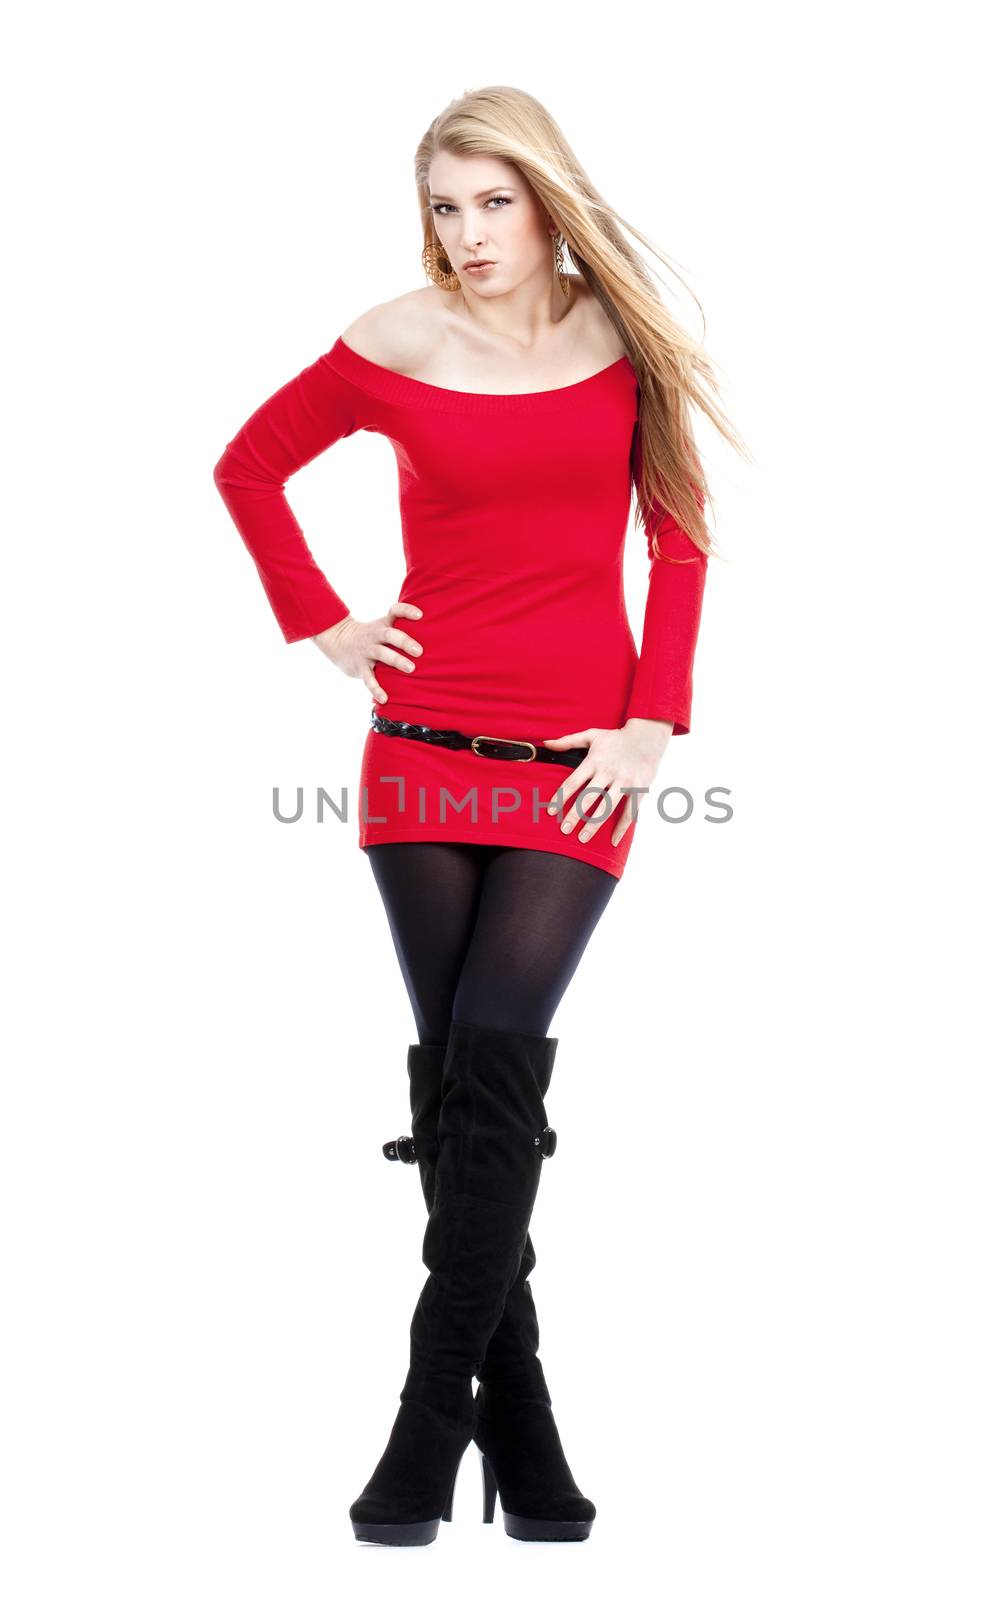 young woman with blond hair in red dress standing - isolated on white